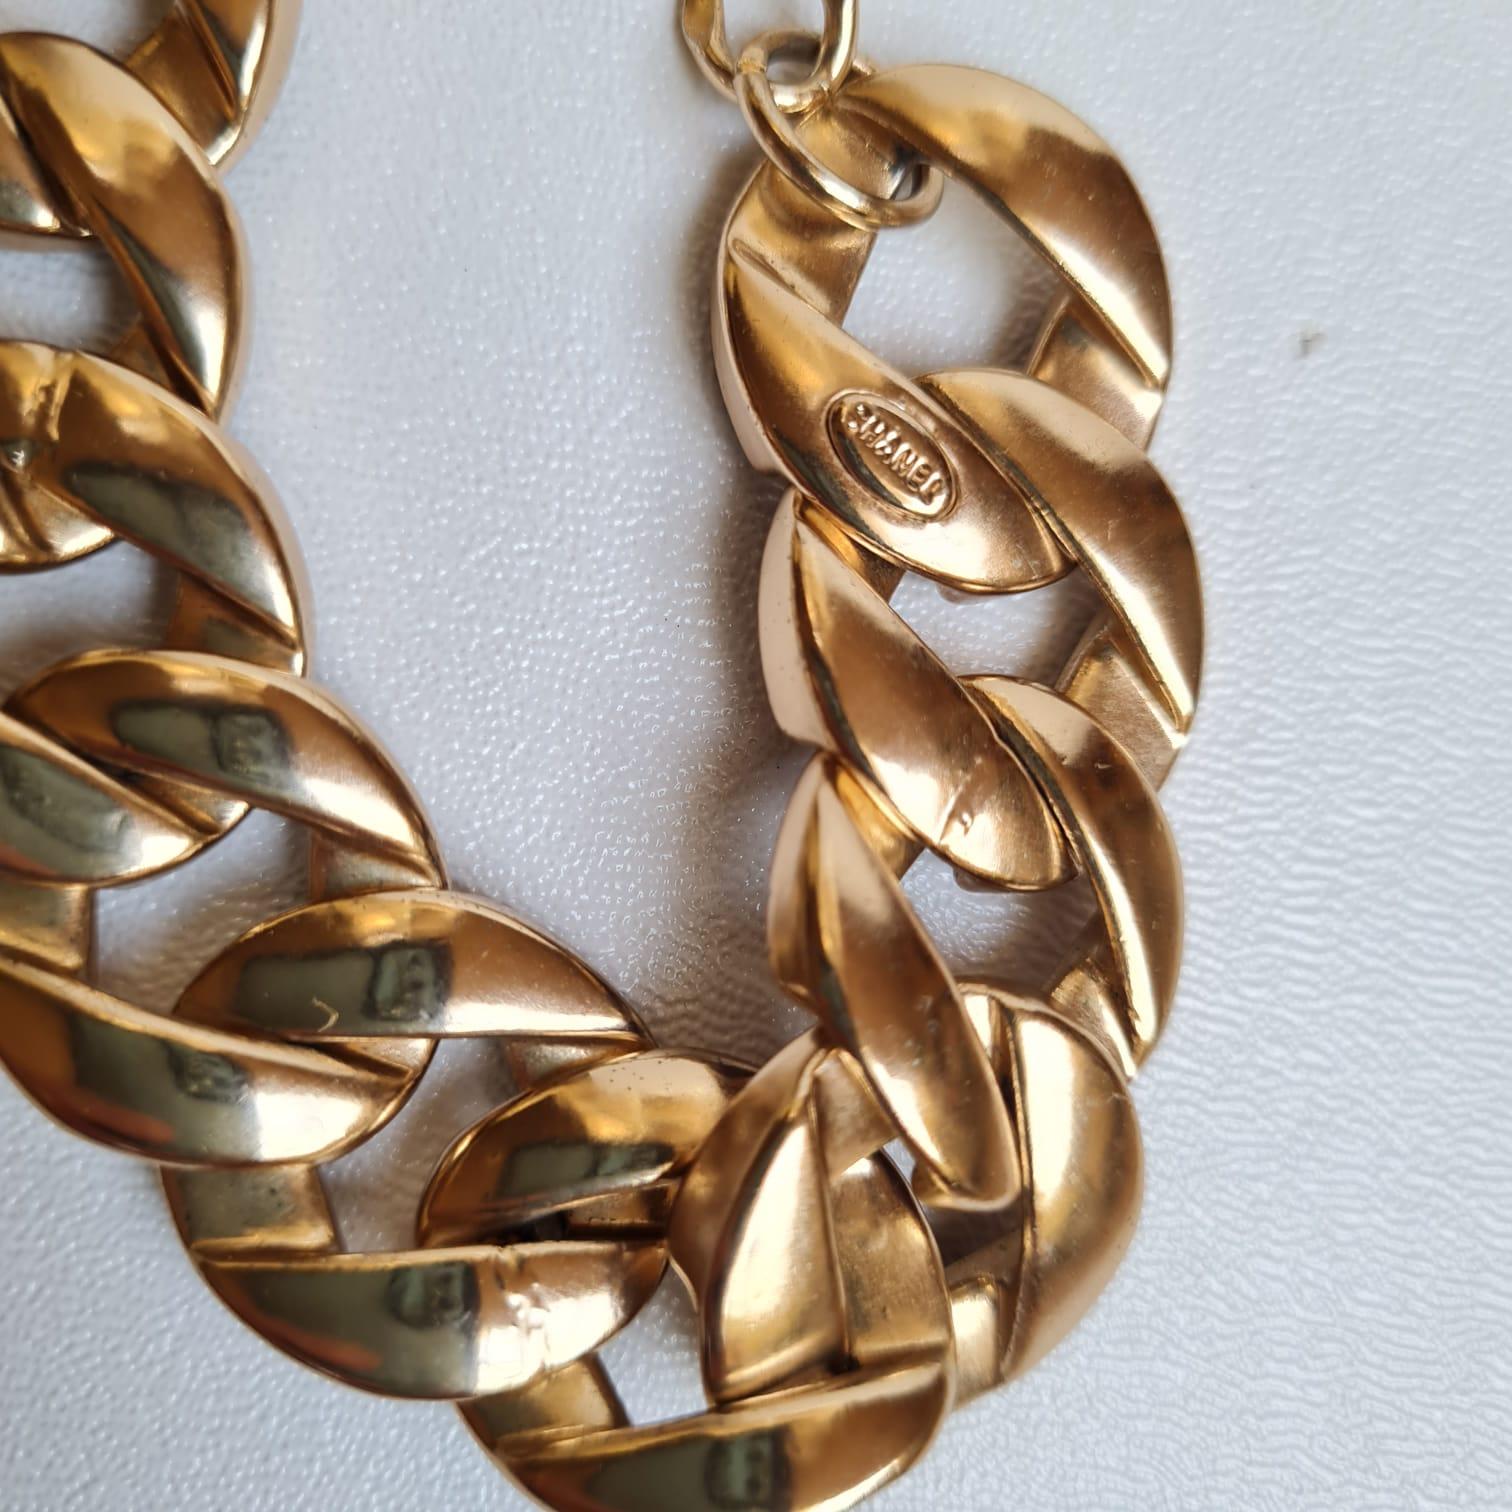 Beautiful chanel chain enamel necklace from 2012. Overall in great condition with light hairline scratches. Reversible as well, can use the gold surface part outside. Comes as is.